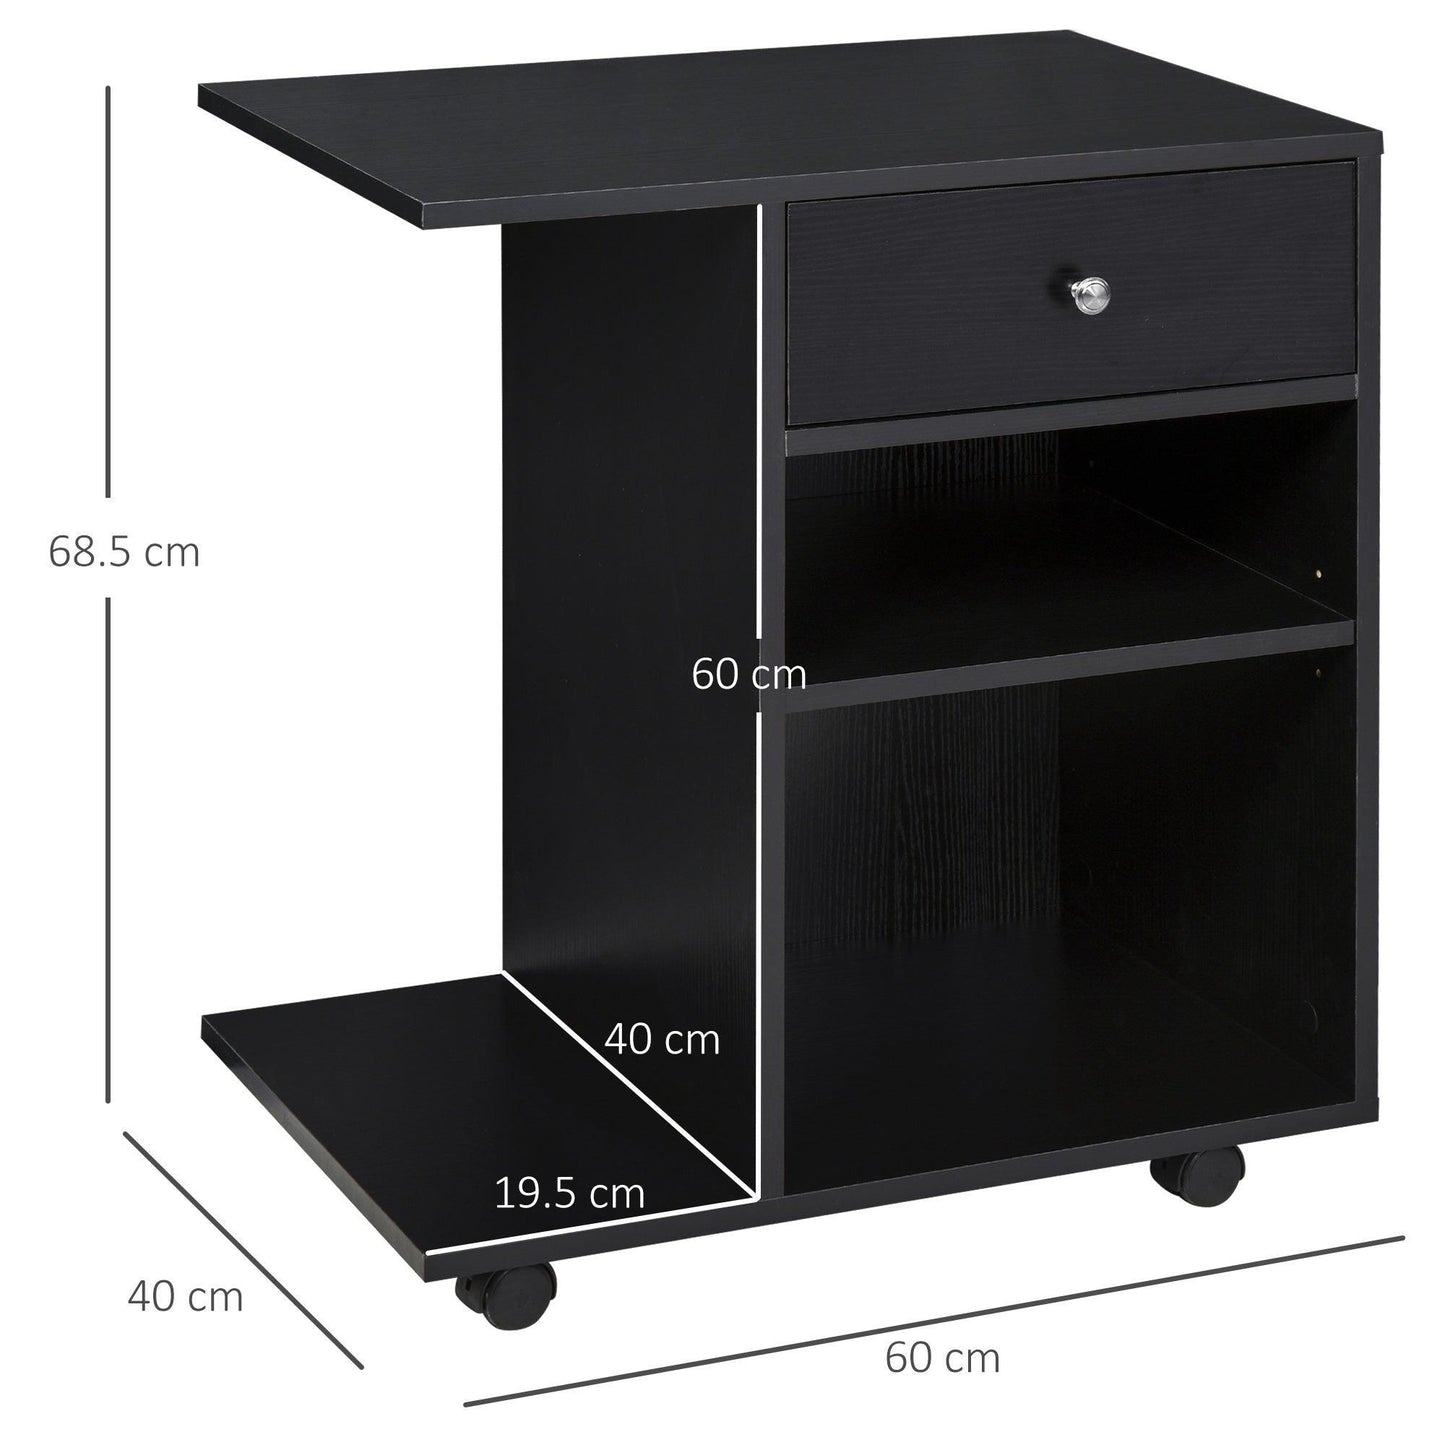 Vinsetto Mobile Printer Stand with Adjustable Shelf and Wheels - Black - ALL4U RETAILER LTD